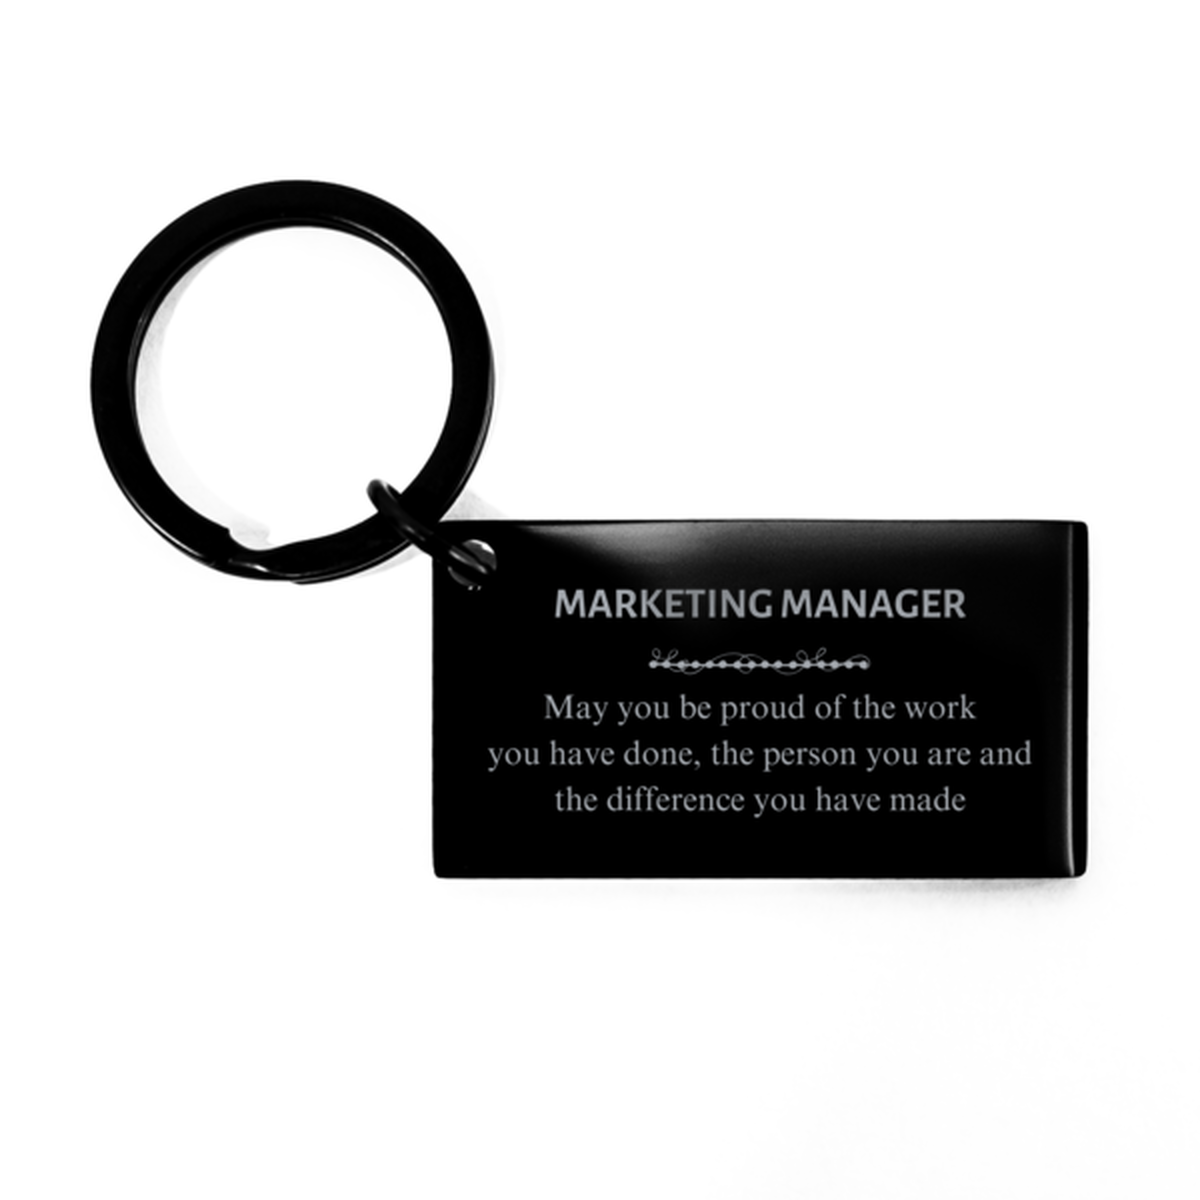 Office Clerk May you be proud of the work you have done, Retirement Marketing Manager Keychain for Colleague Appreciation Gifts Amazing for Marketing Manager